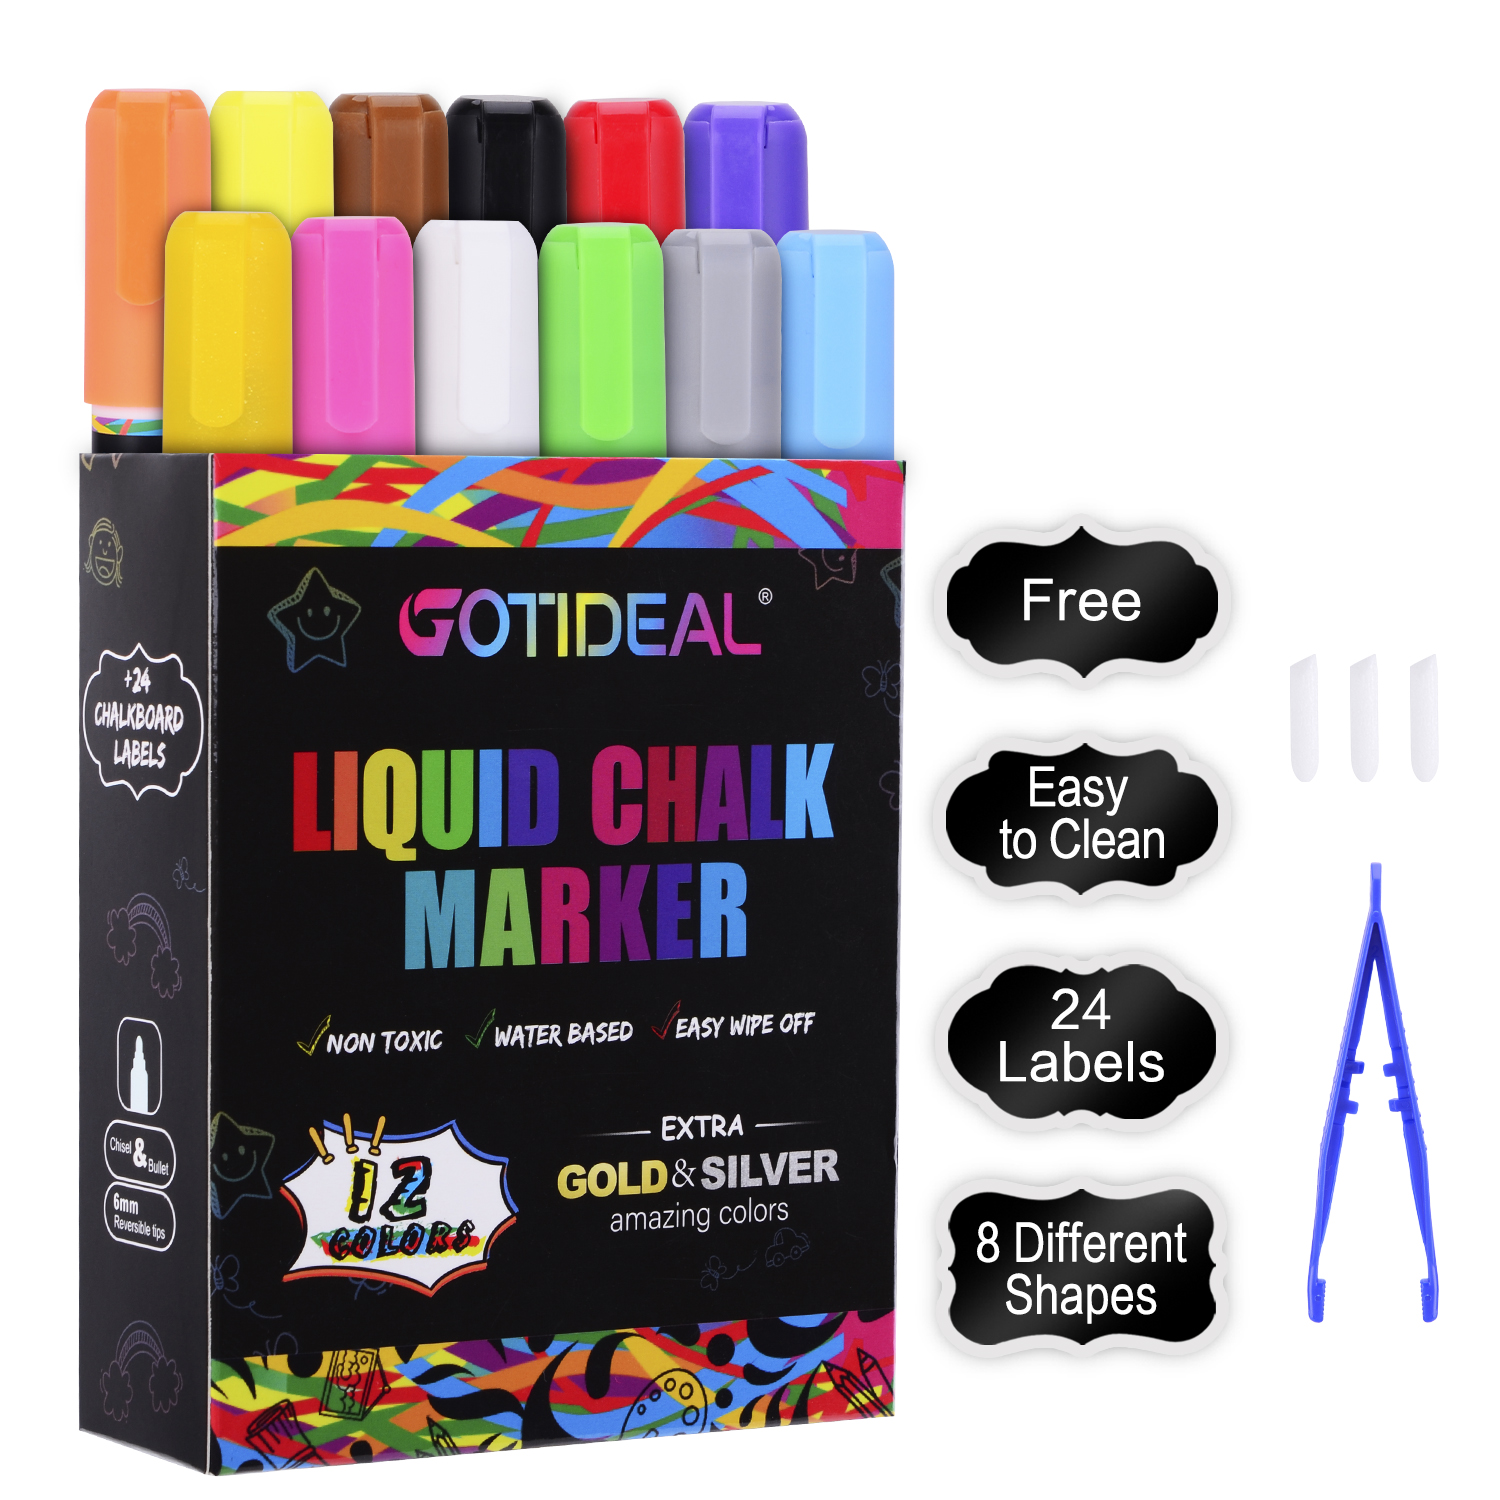  GOTIDEAL Acrylic Paint Mars Black Tubes(120ml, 4.1 oz) Non  Toxic Non Fading,Rich Pigments for Painters, Adults & Kids, Ideal for  Canvas Wood Clay Fabric Ceramic Craft Supplies (Mars Black)-Glossy : Arts